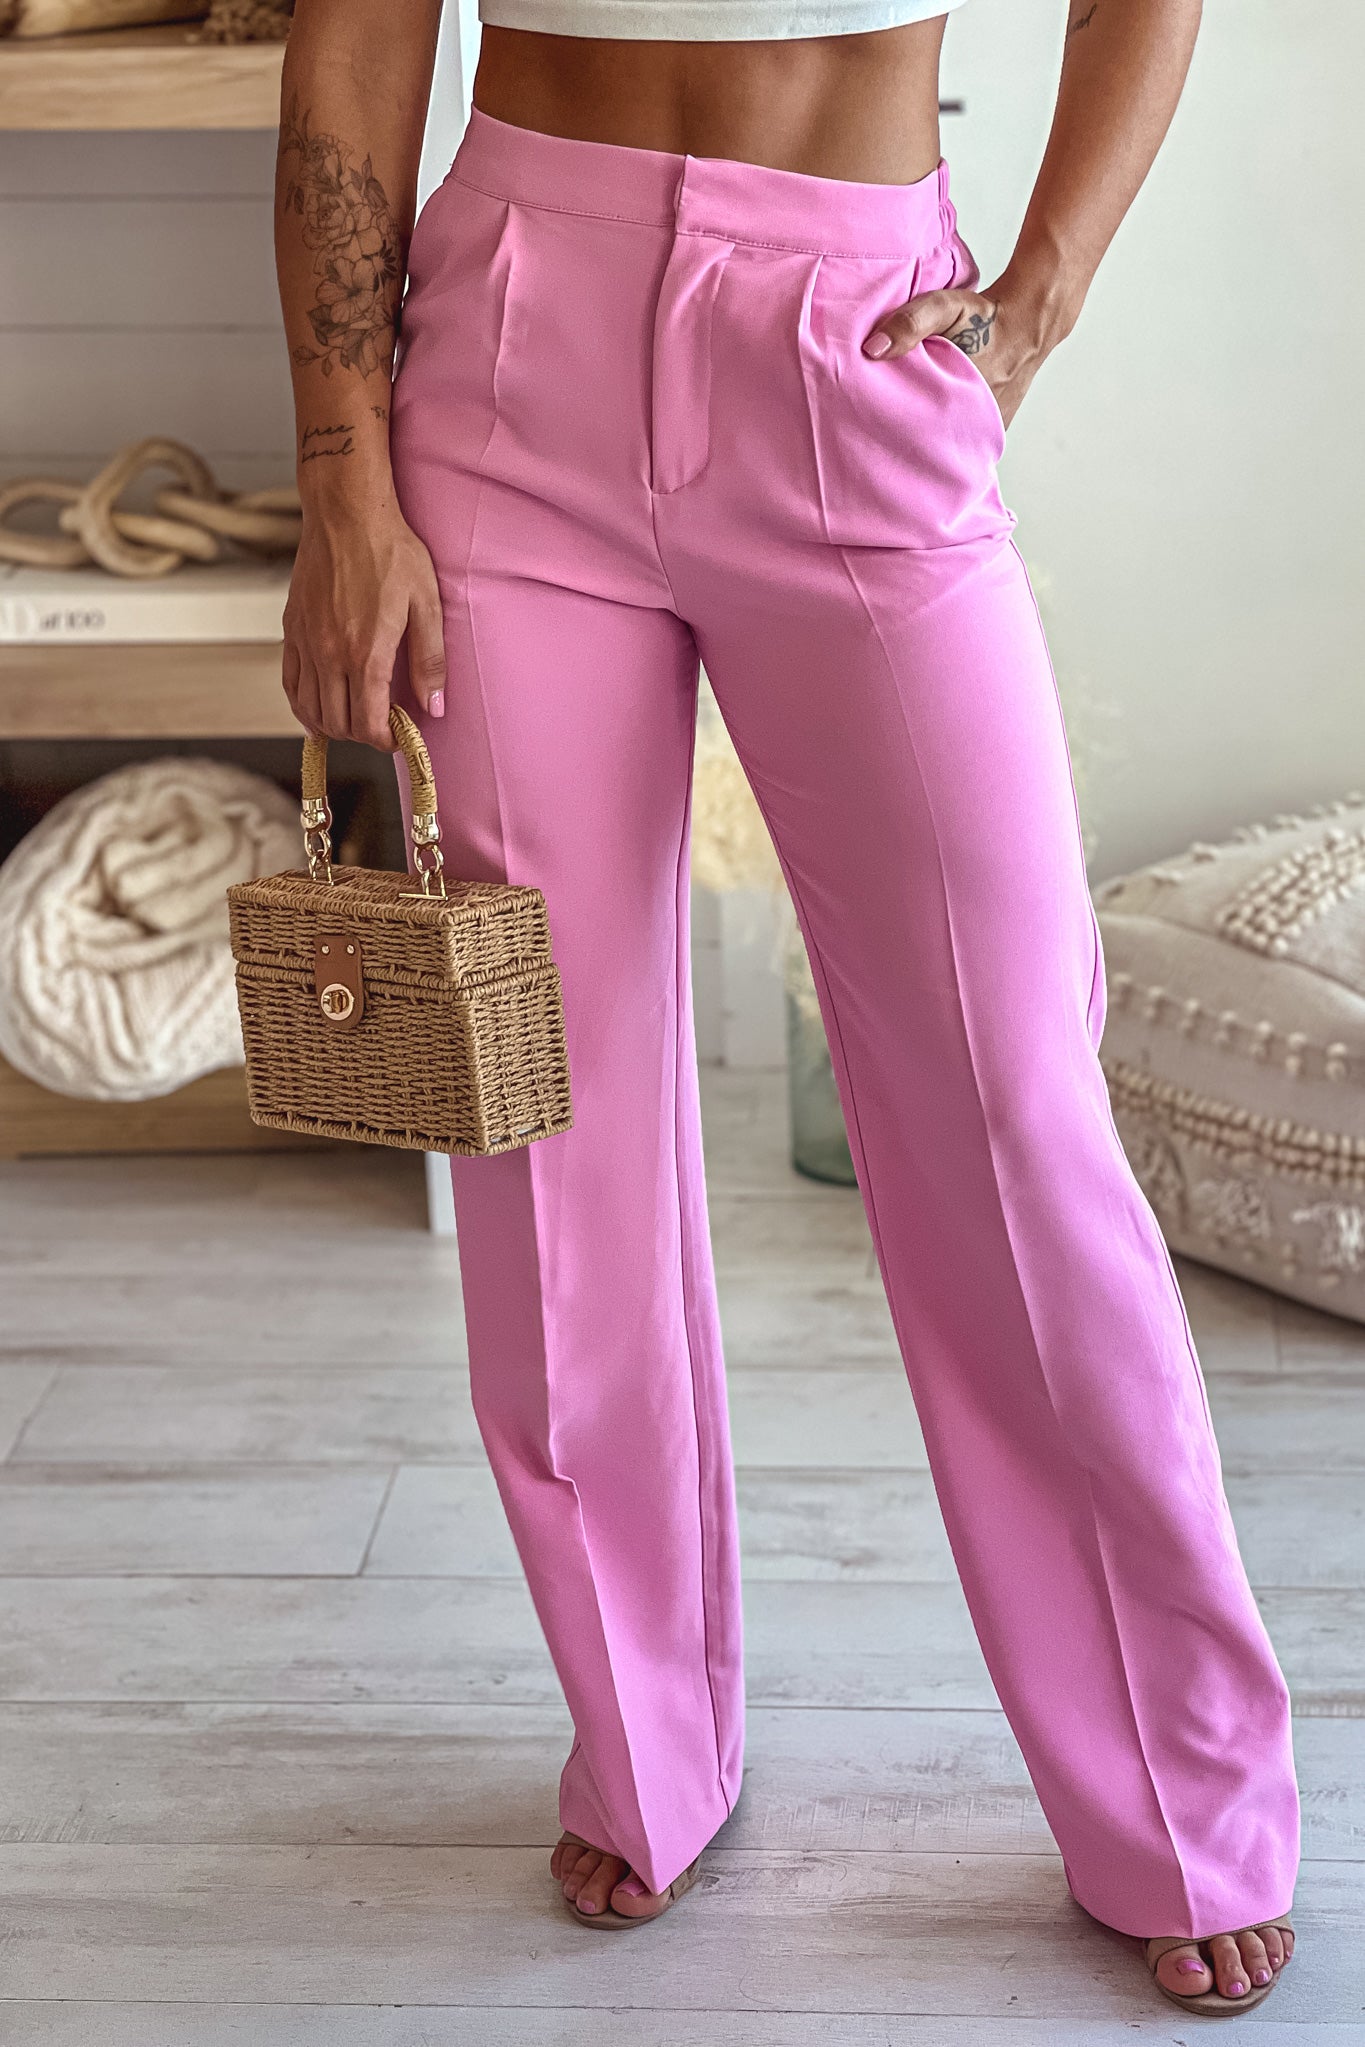 Comfy and Stylish Pink Jeggings